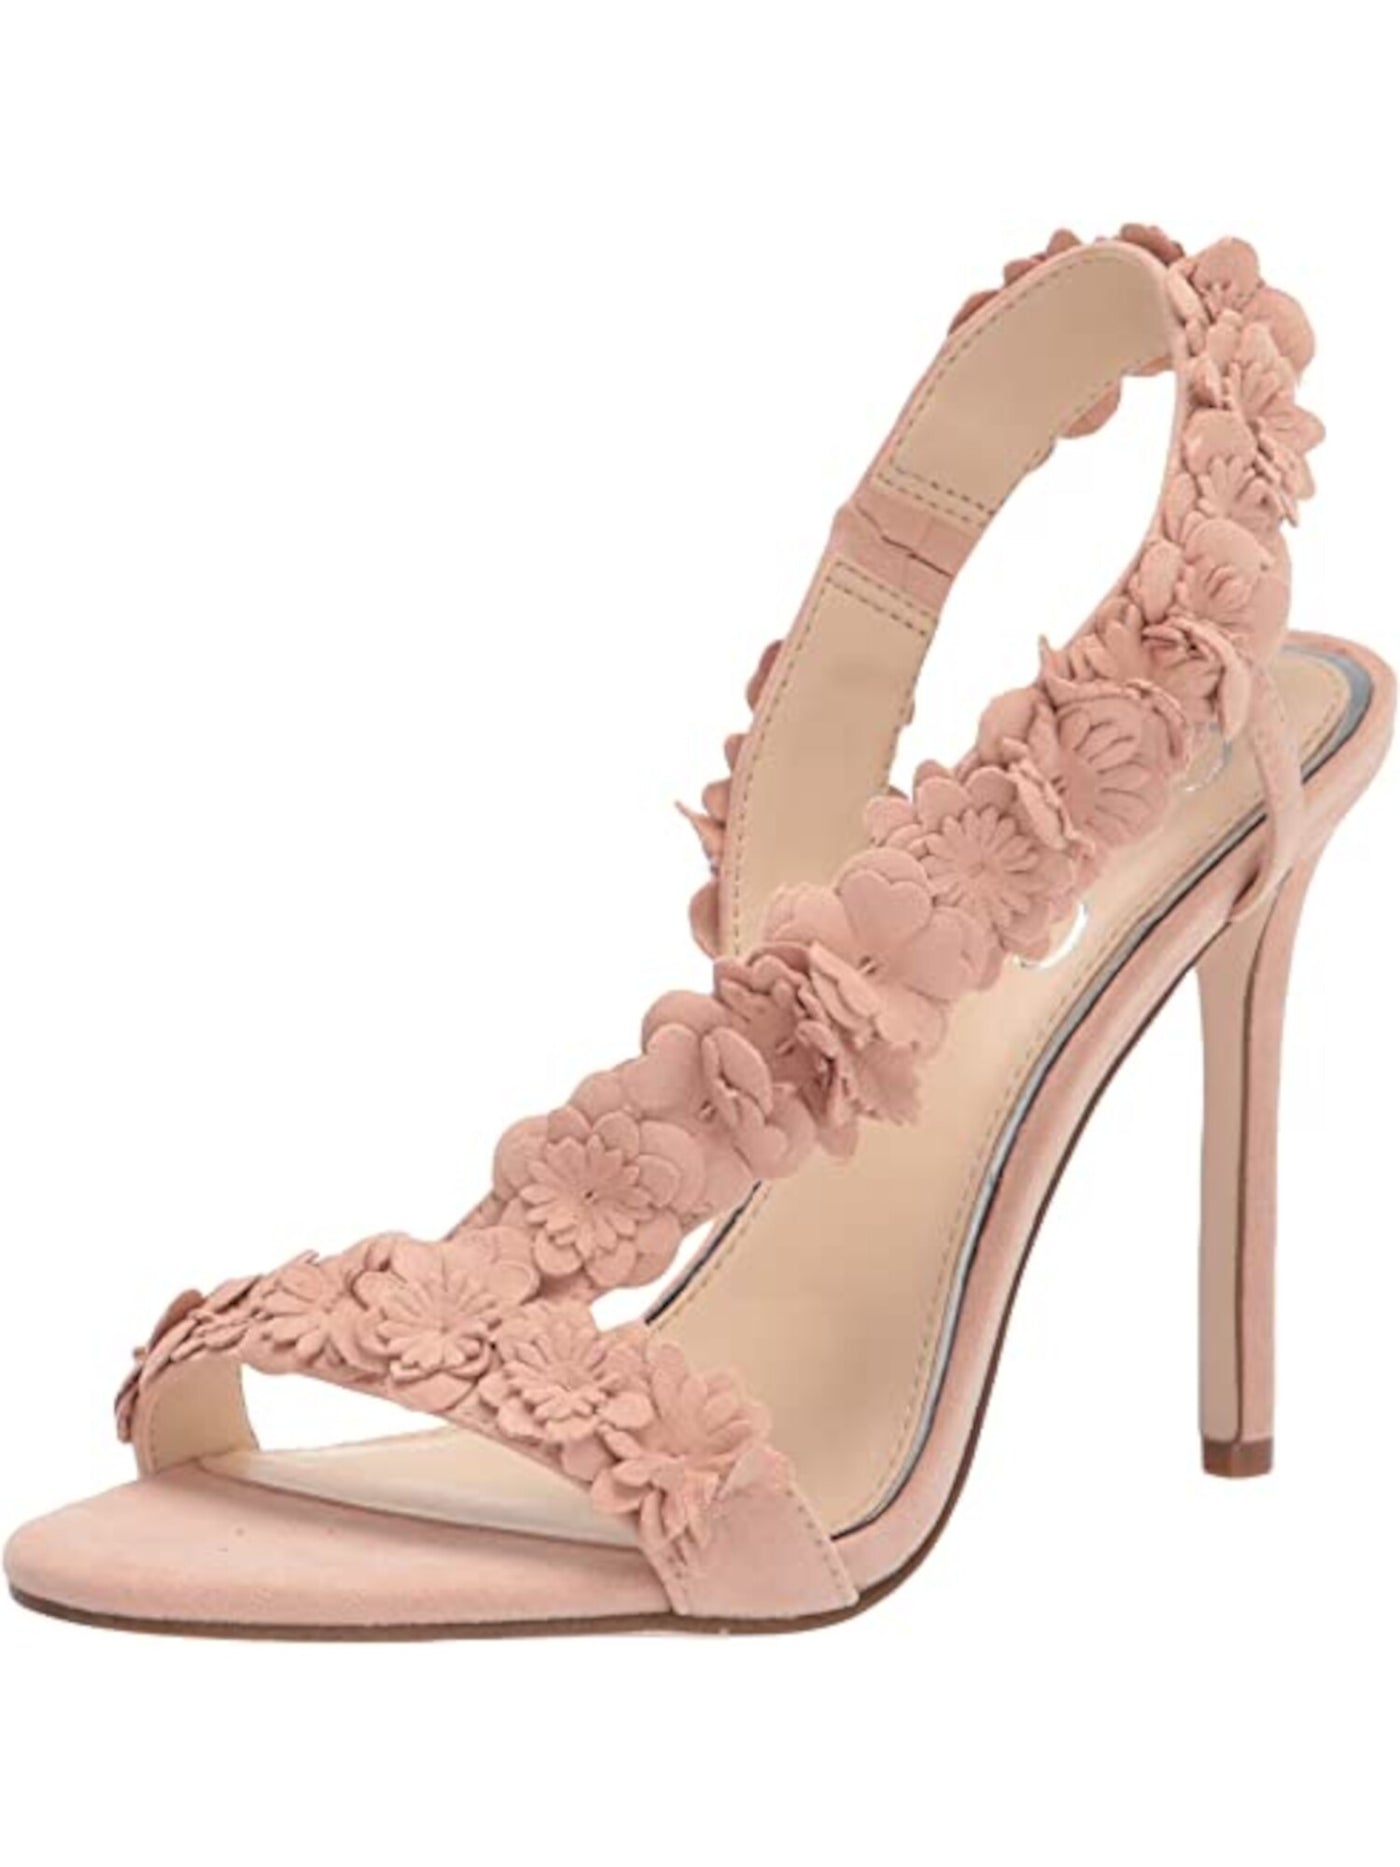 JESSICA SIMPSON Womens Pink Floral Goring Asymmetrical Padded Jessin Almond Toe Stiletto Slip On Dress Sandals Shoes 6.5 M